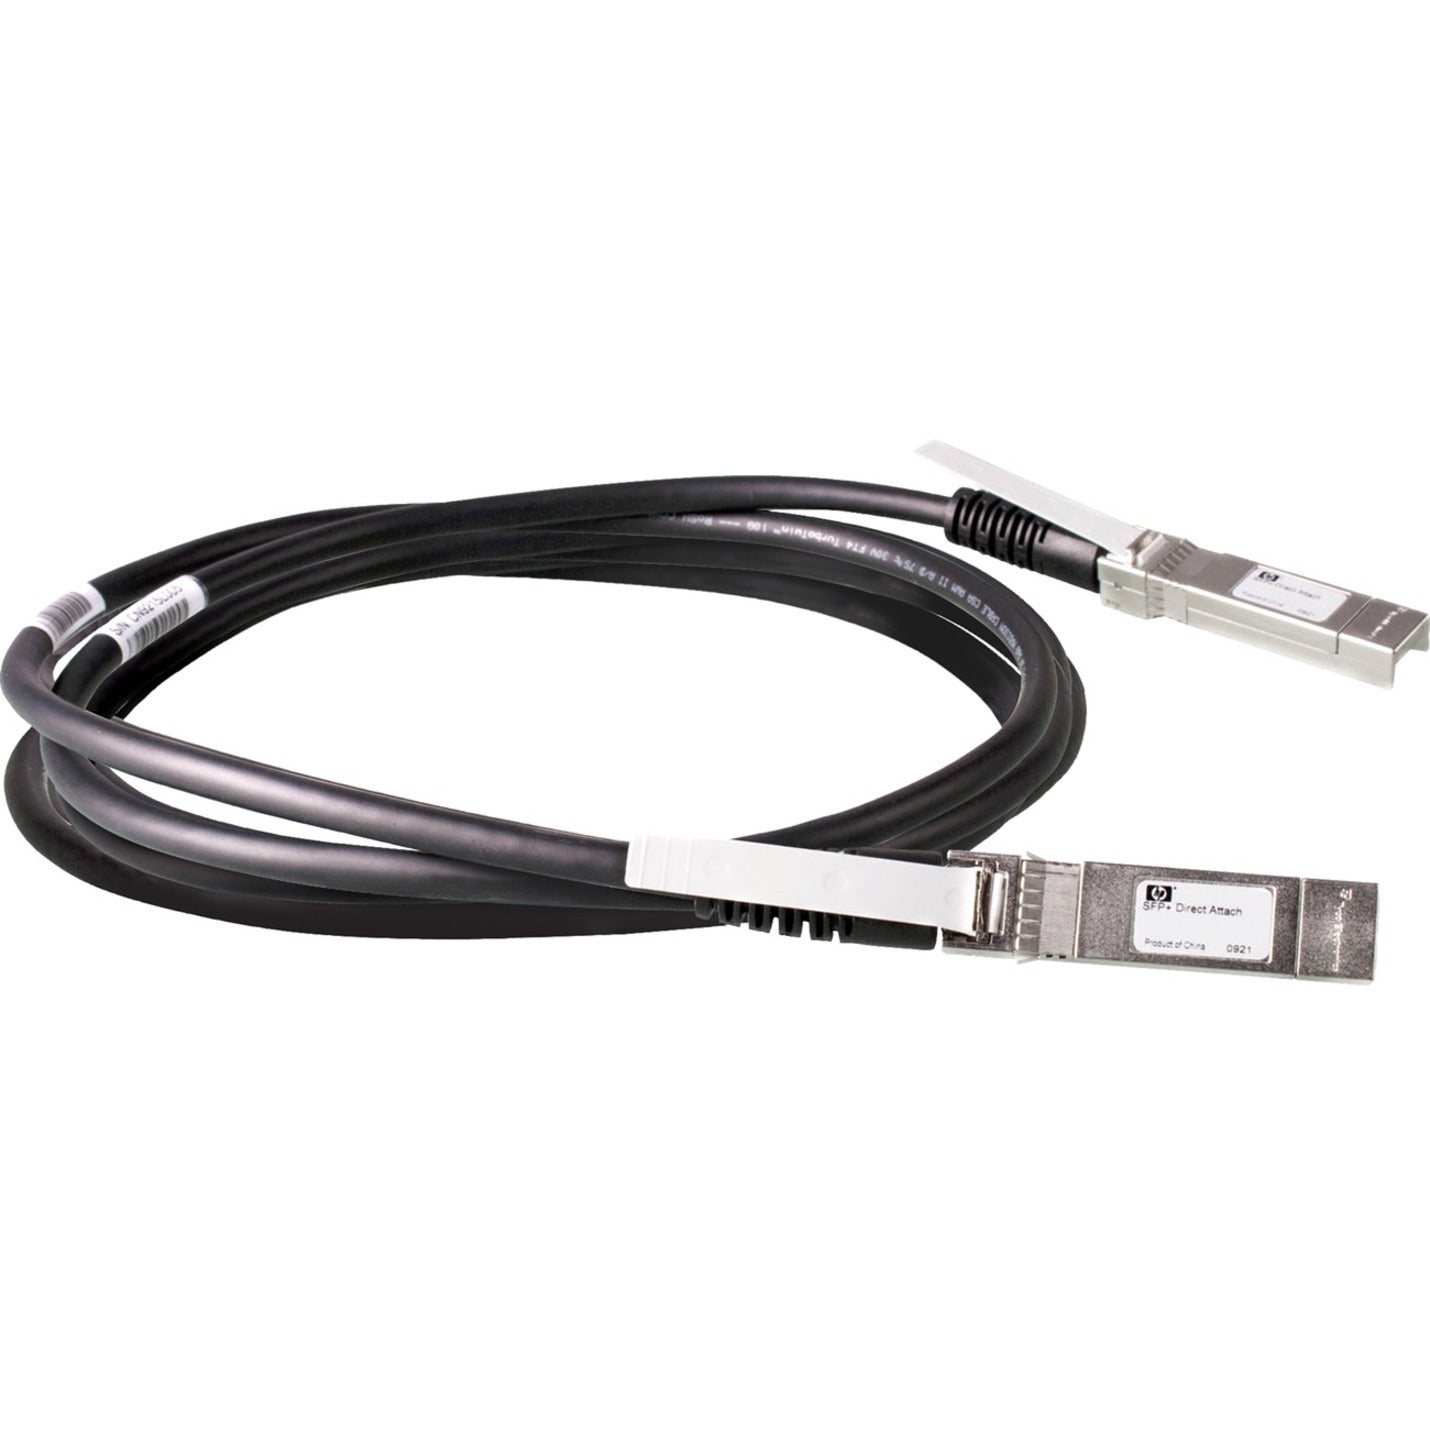 HPE 487655-B21 BLC SFP+ 10GBE Cable, 9.84ft, Black